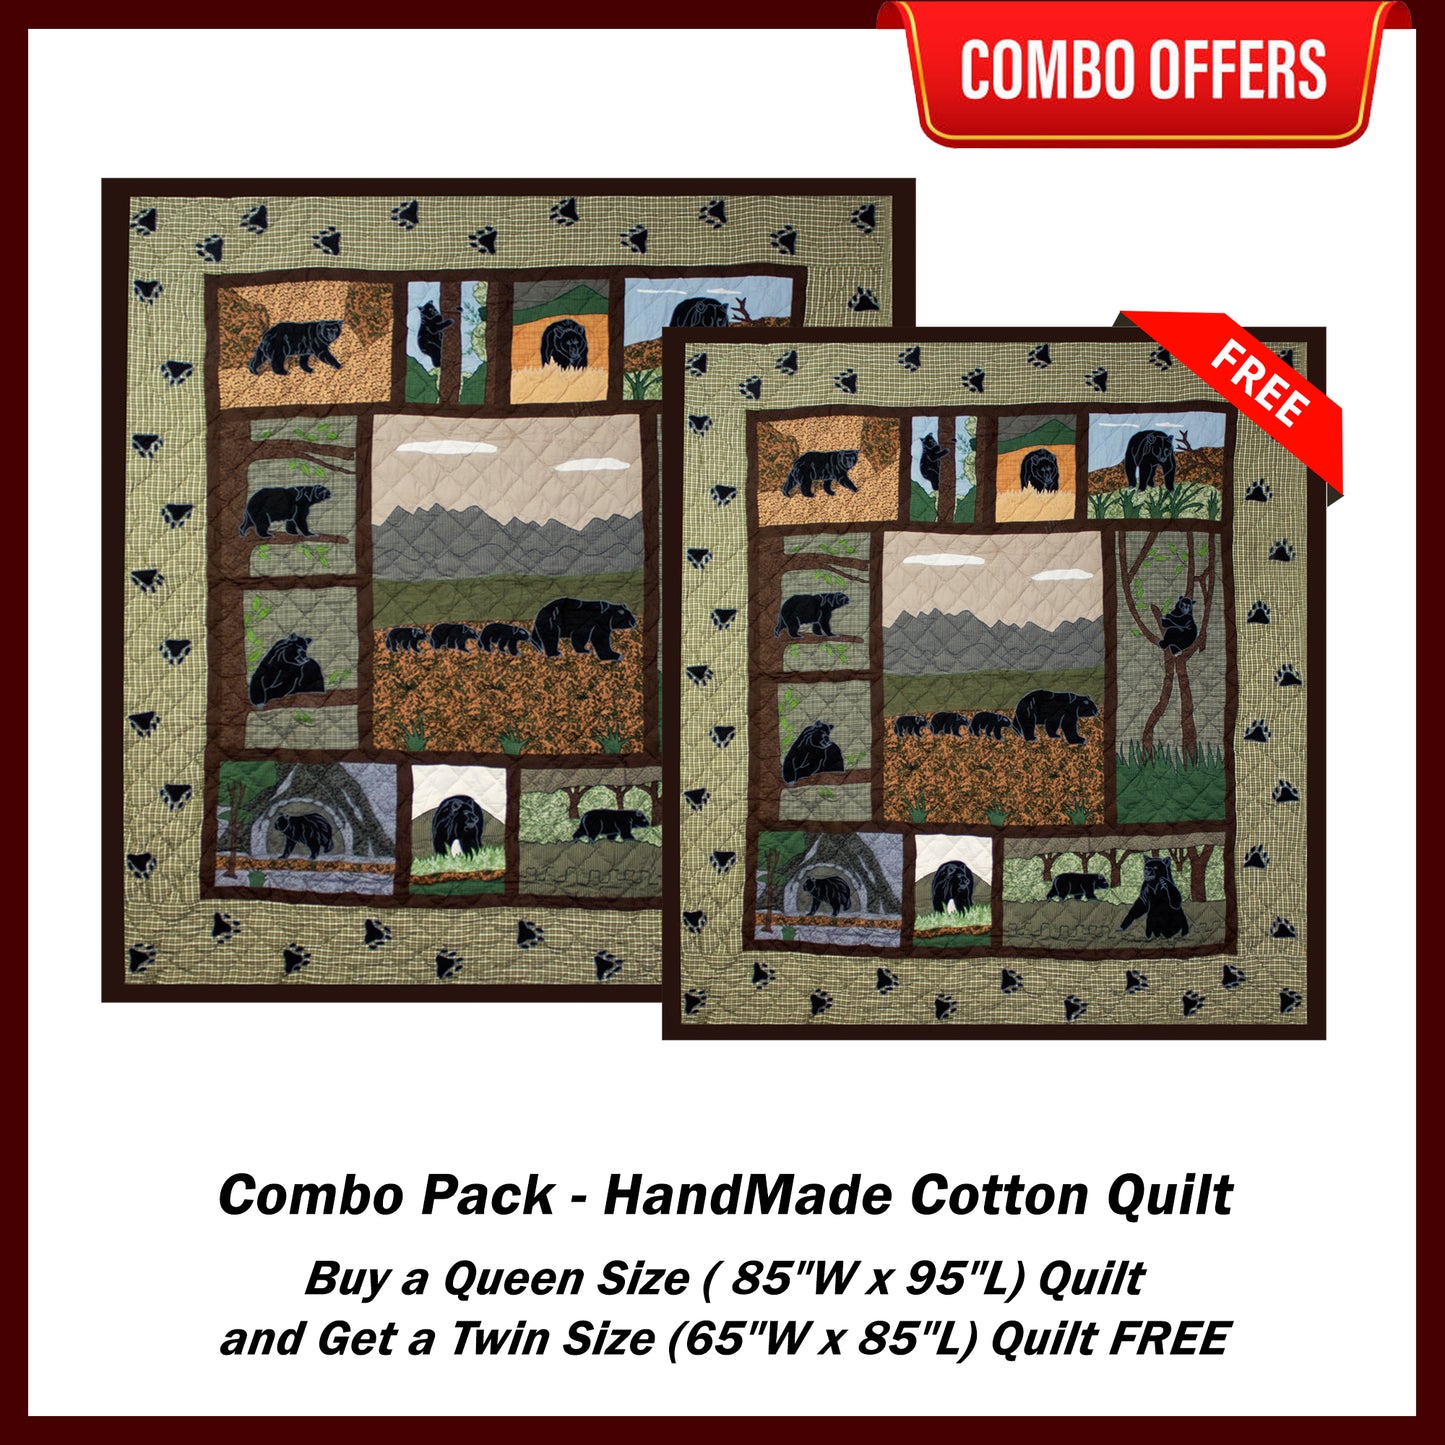 Bear Country  Handmade Cotton Quilt - Buy a Queen Size Quilt and Get a Twin Size Quilt FREE